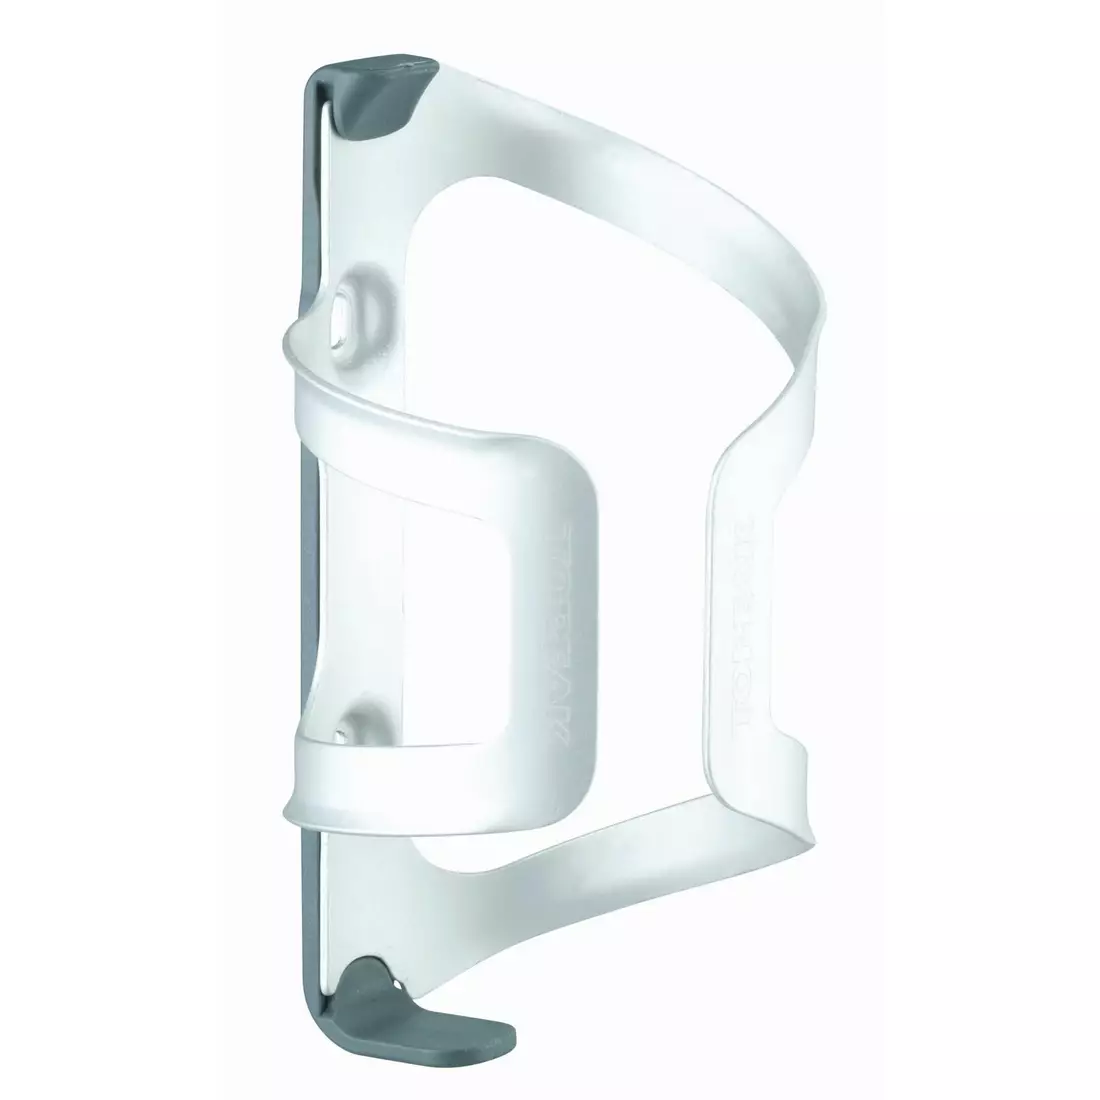 TOPEAK DUALSIDE CAGE double-sided water bottle cage silver TDSC01-S